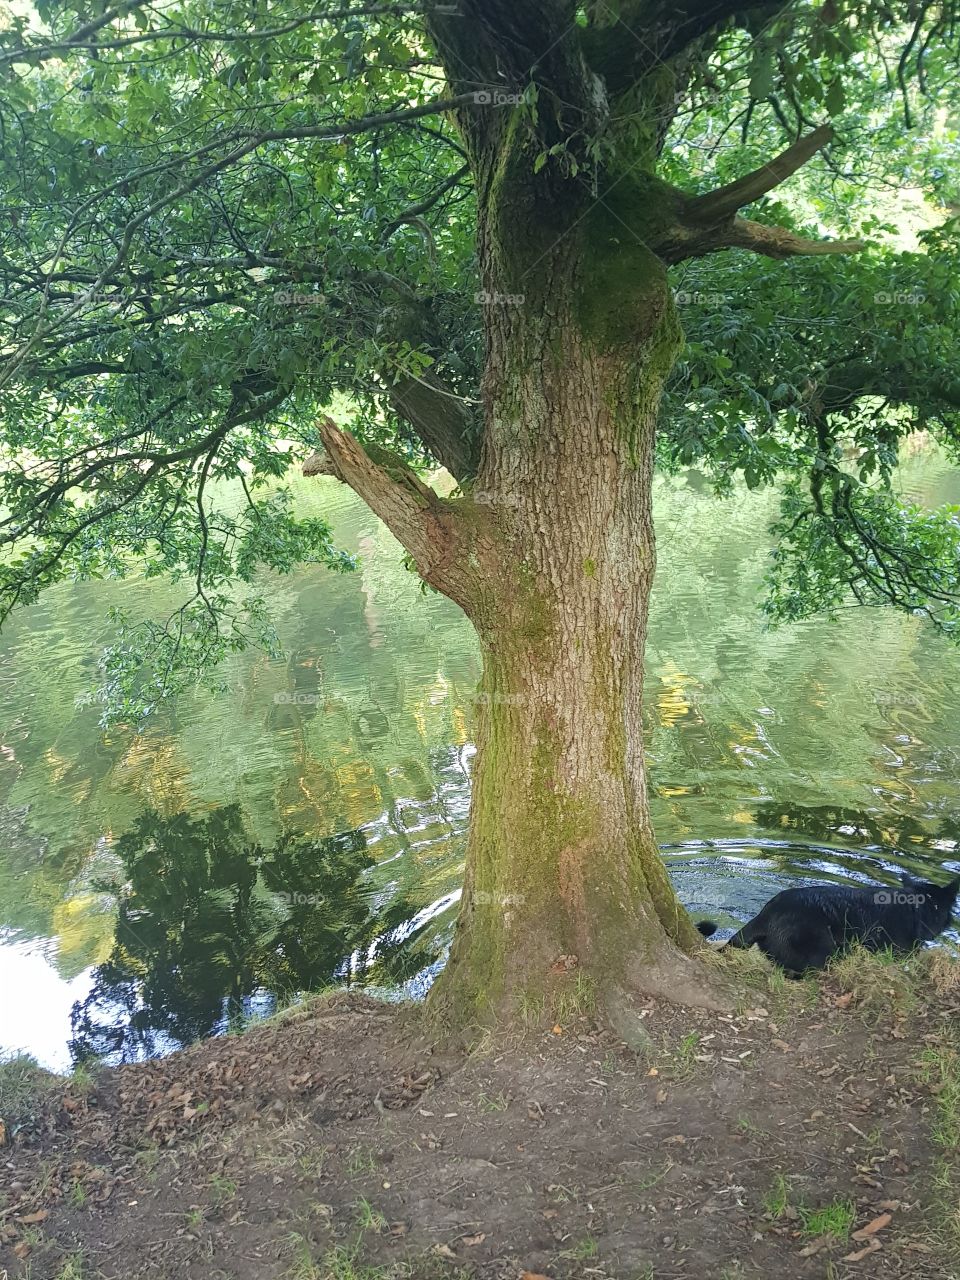 Beautiful sunny evening at Lliw Reservoir. I love this gorgeous tree